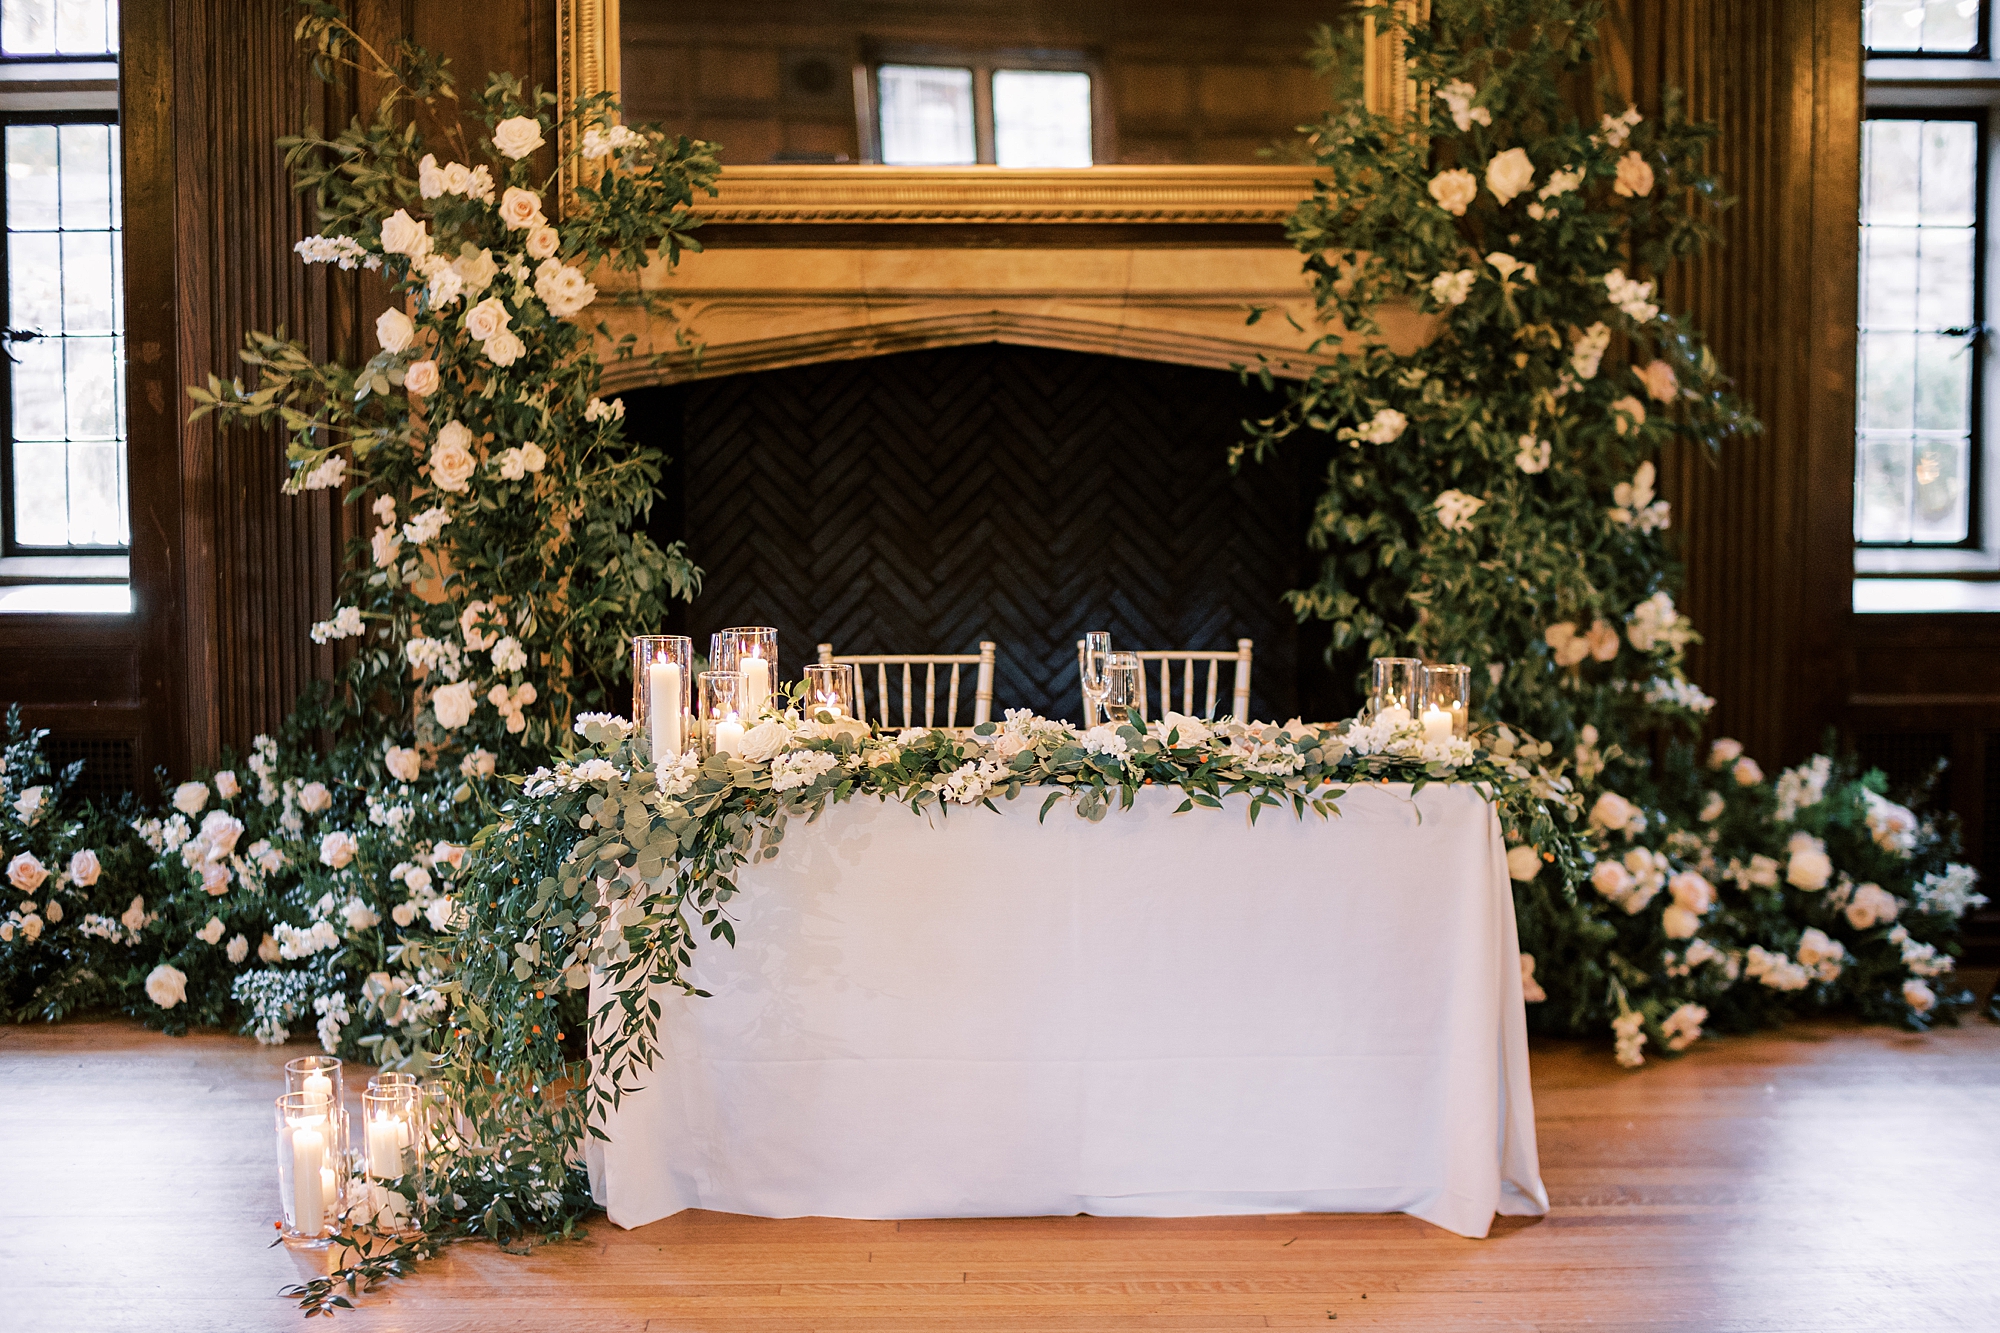 sweetheart table with floral arrangements on either side of fireplace 